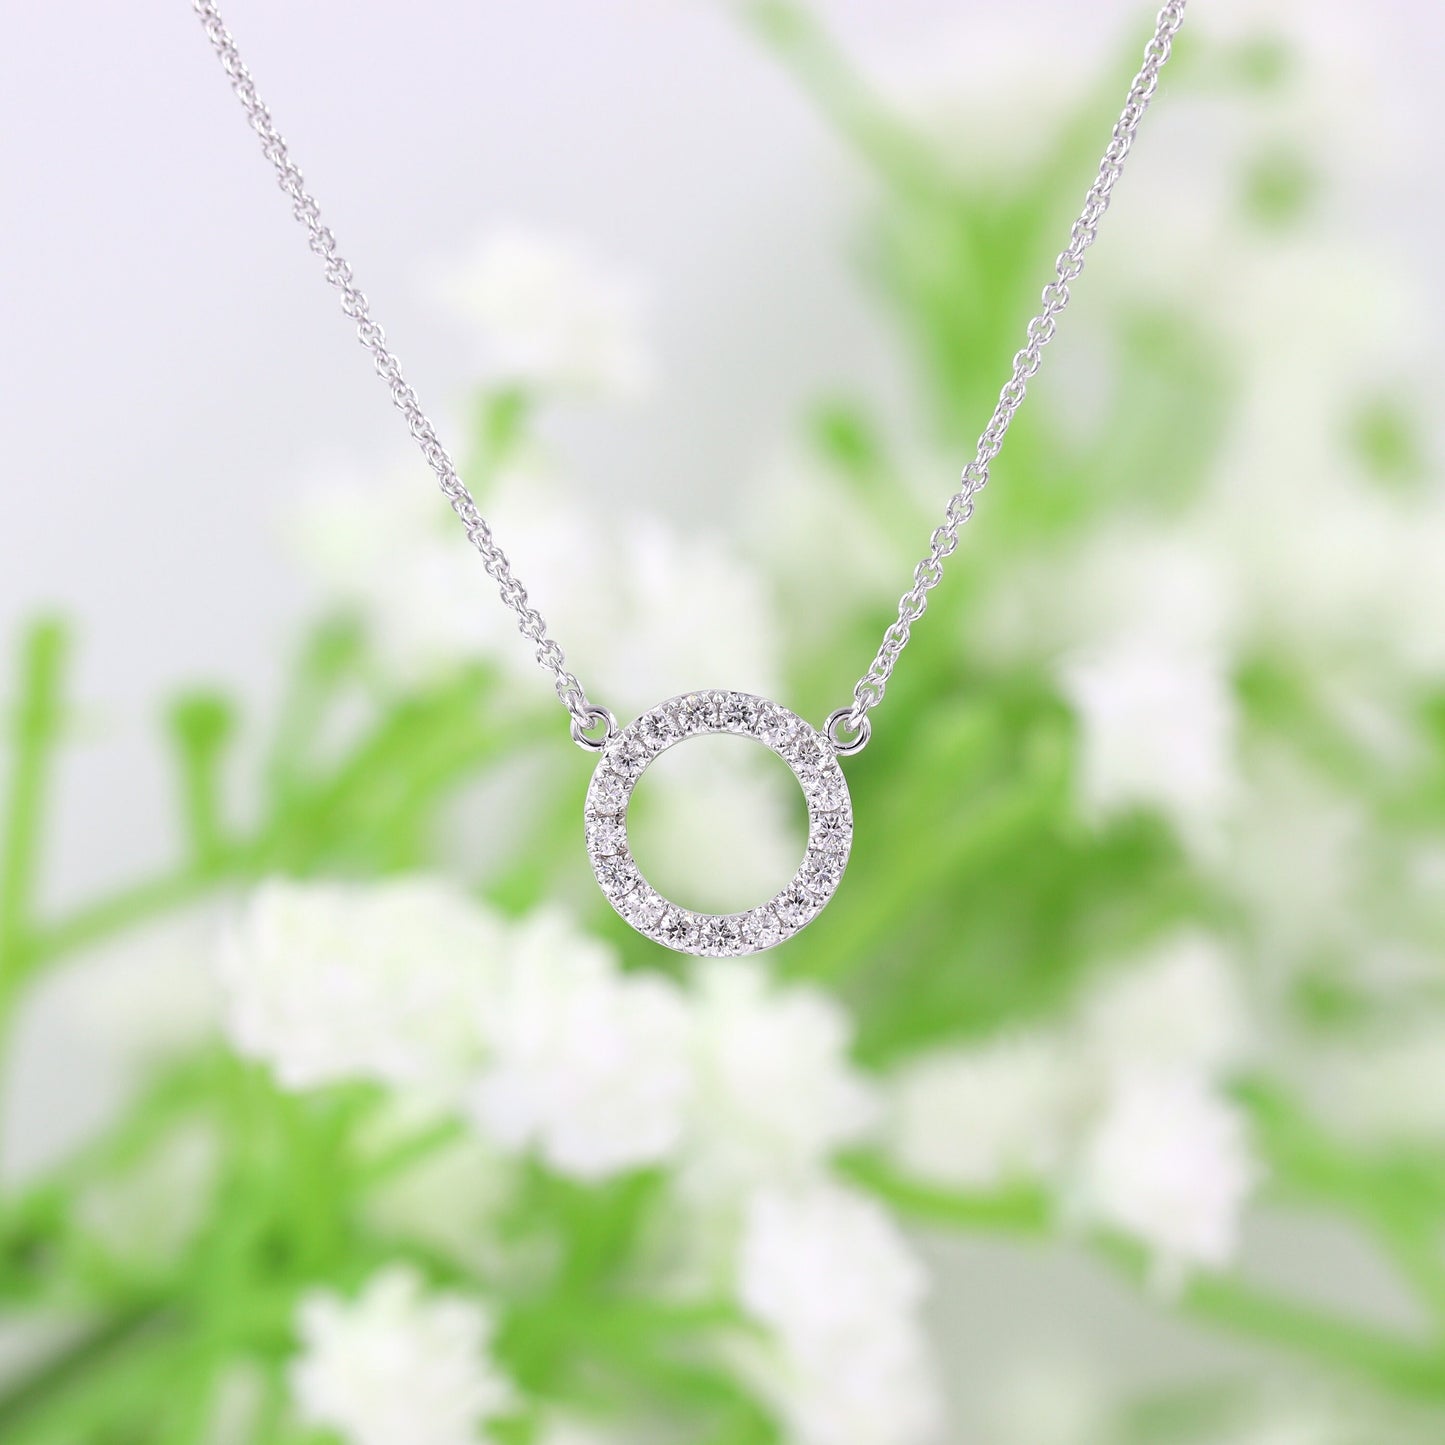 9.2mm Open Circle Diamond Necklace/Circle Pendant/14k Gold Diamond Necklace/Natural Diamond Necklace/Simple Dainty Necklace/Gift for Her